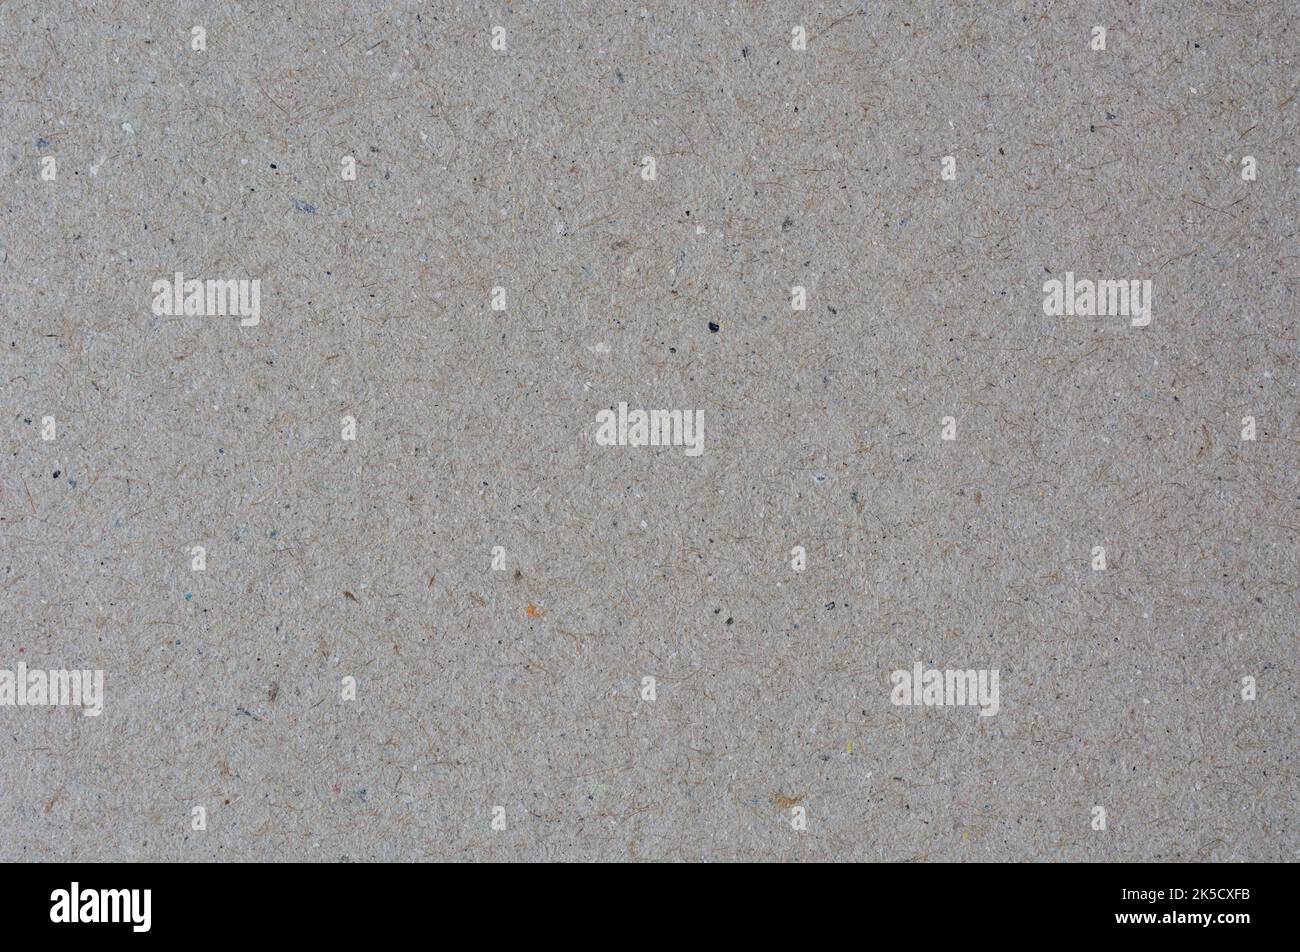 binders board surface, thick, rigid paperboard used in construction of hard book covers, binding boards made from acid-free paste paper, close-up Stock Photo